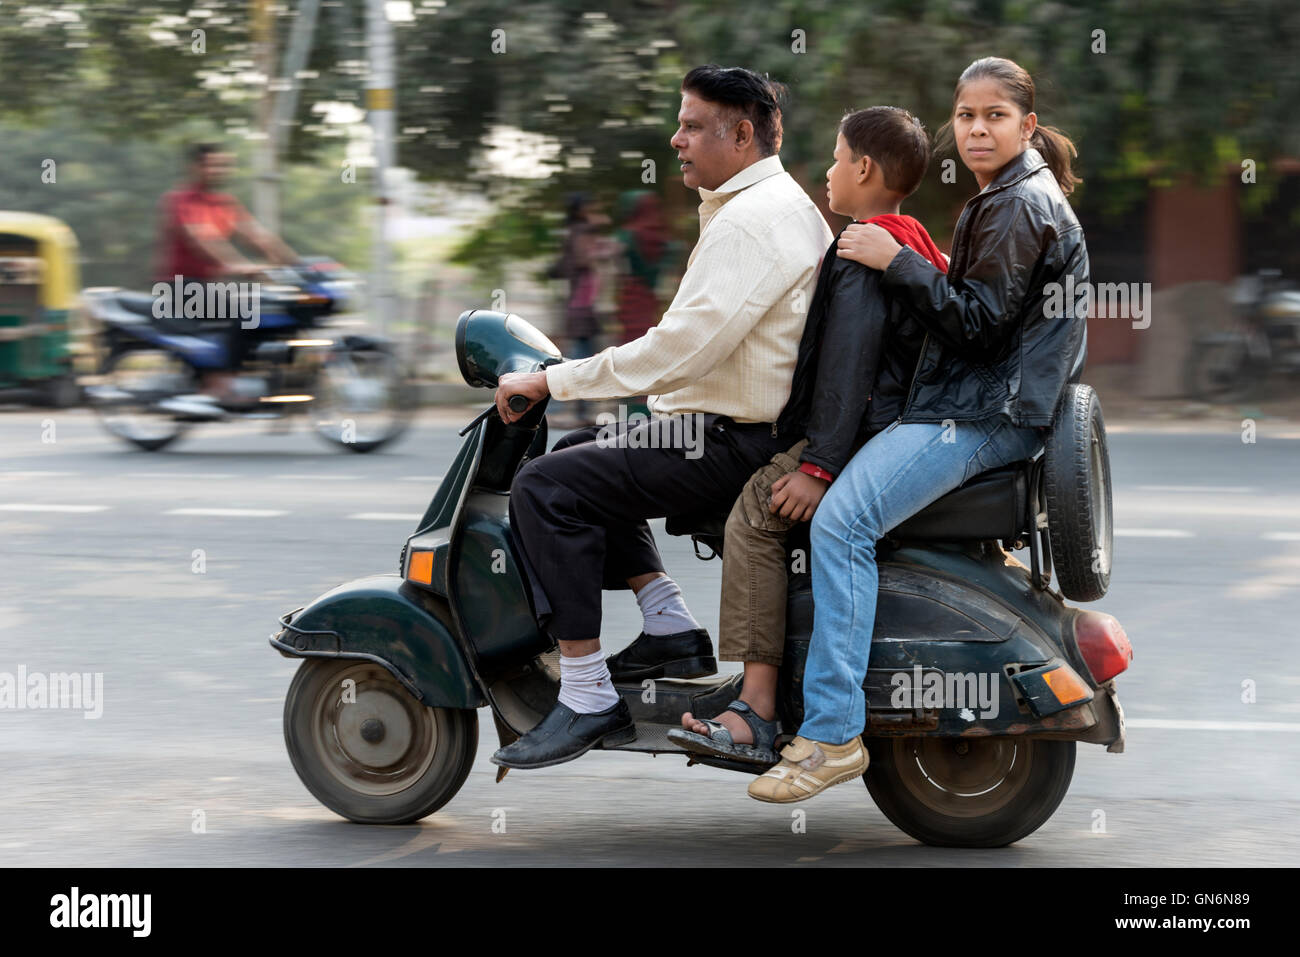 Three on a scooter designed for two on the busy main road at Agra in Uttar Pradesh, India. Stock Photo